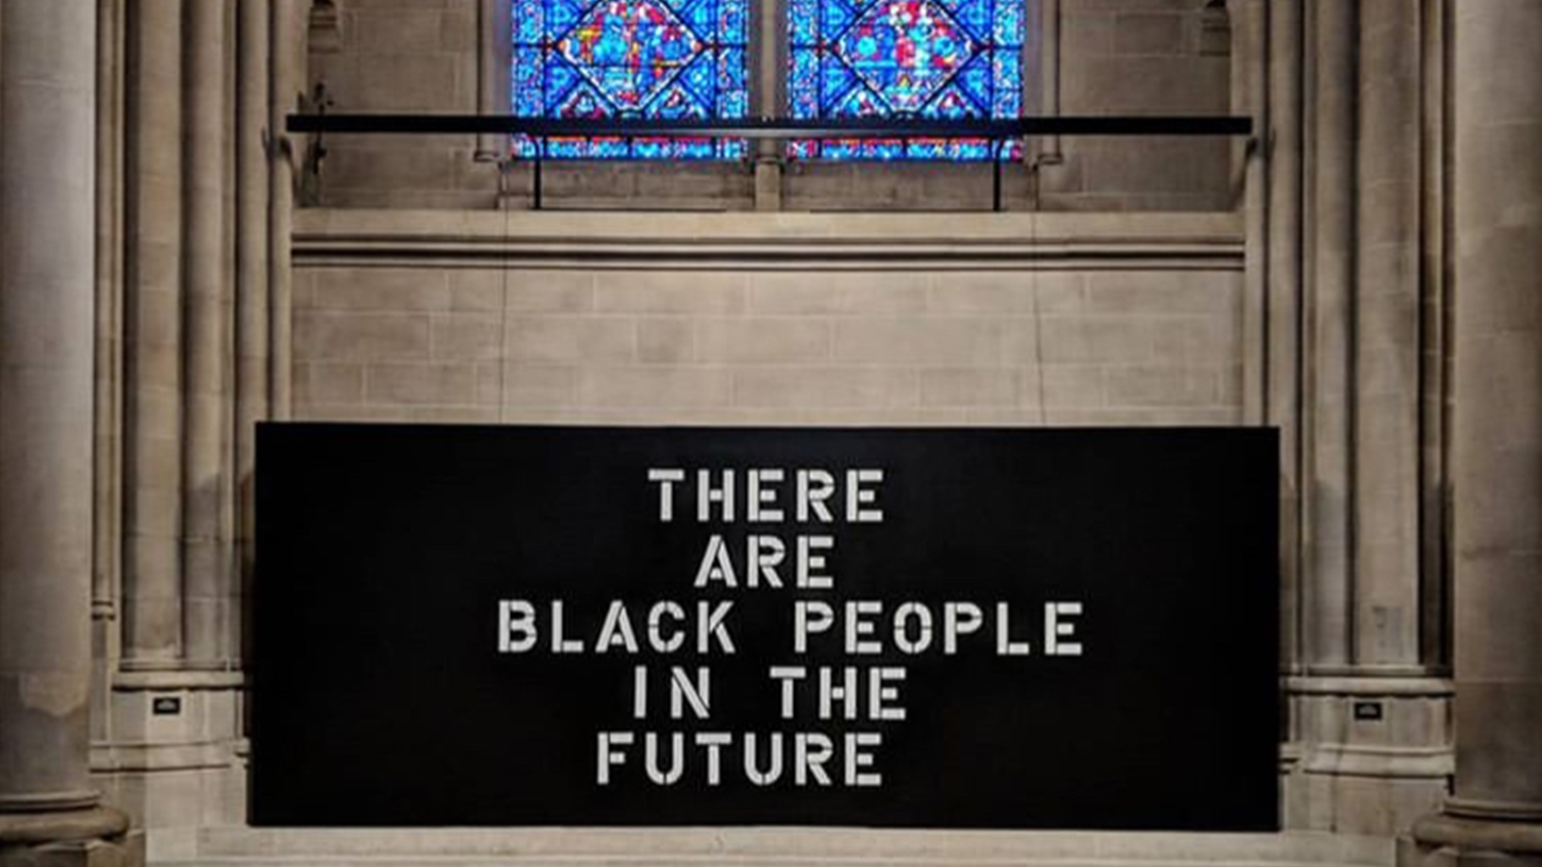 Photograph of a black sign reading "There are Black People in the Future" installed under a stained glass window in a church